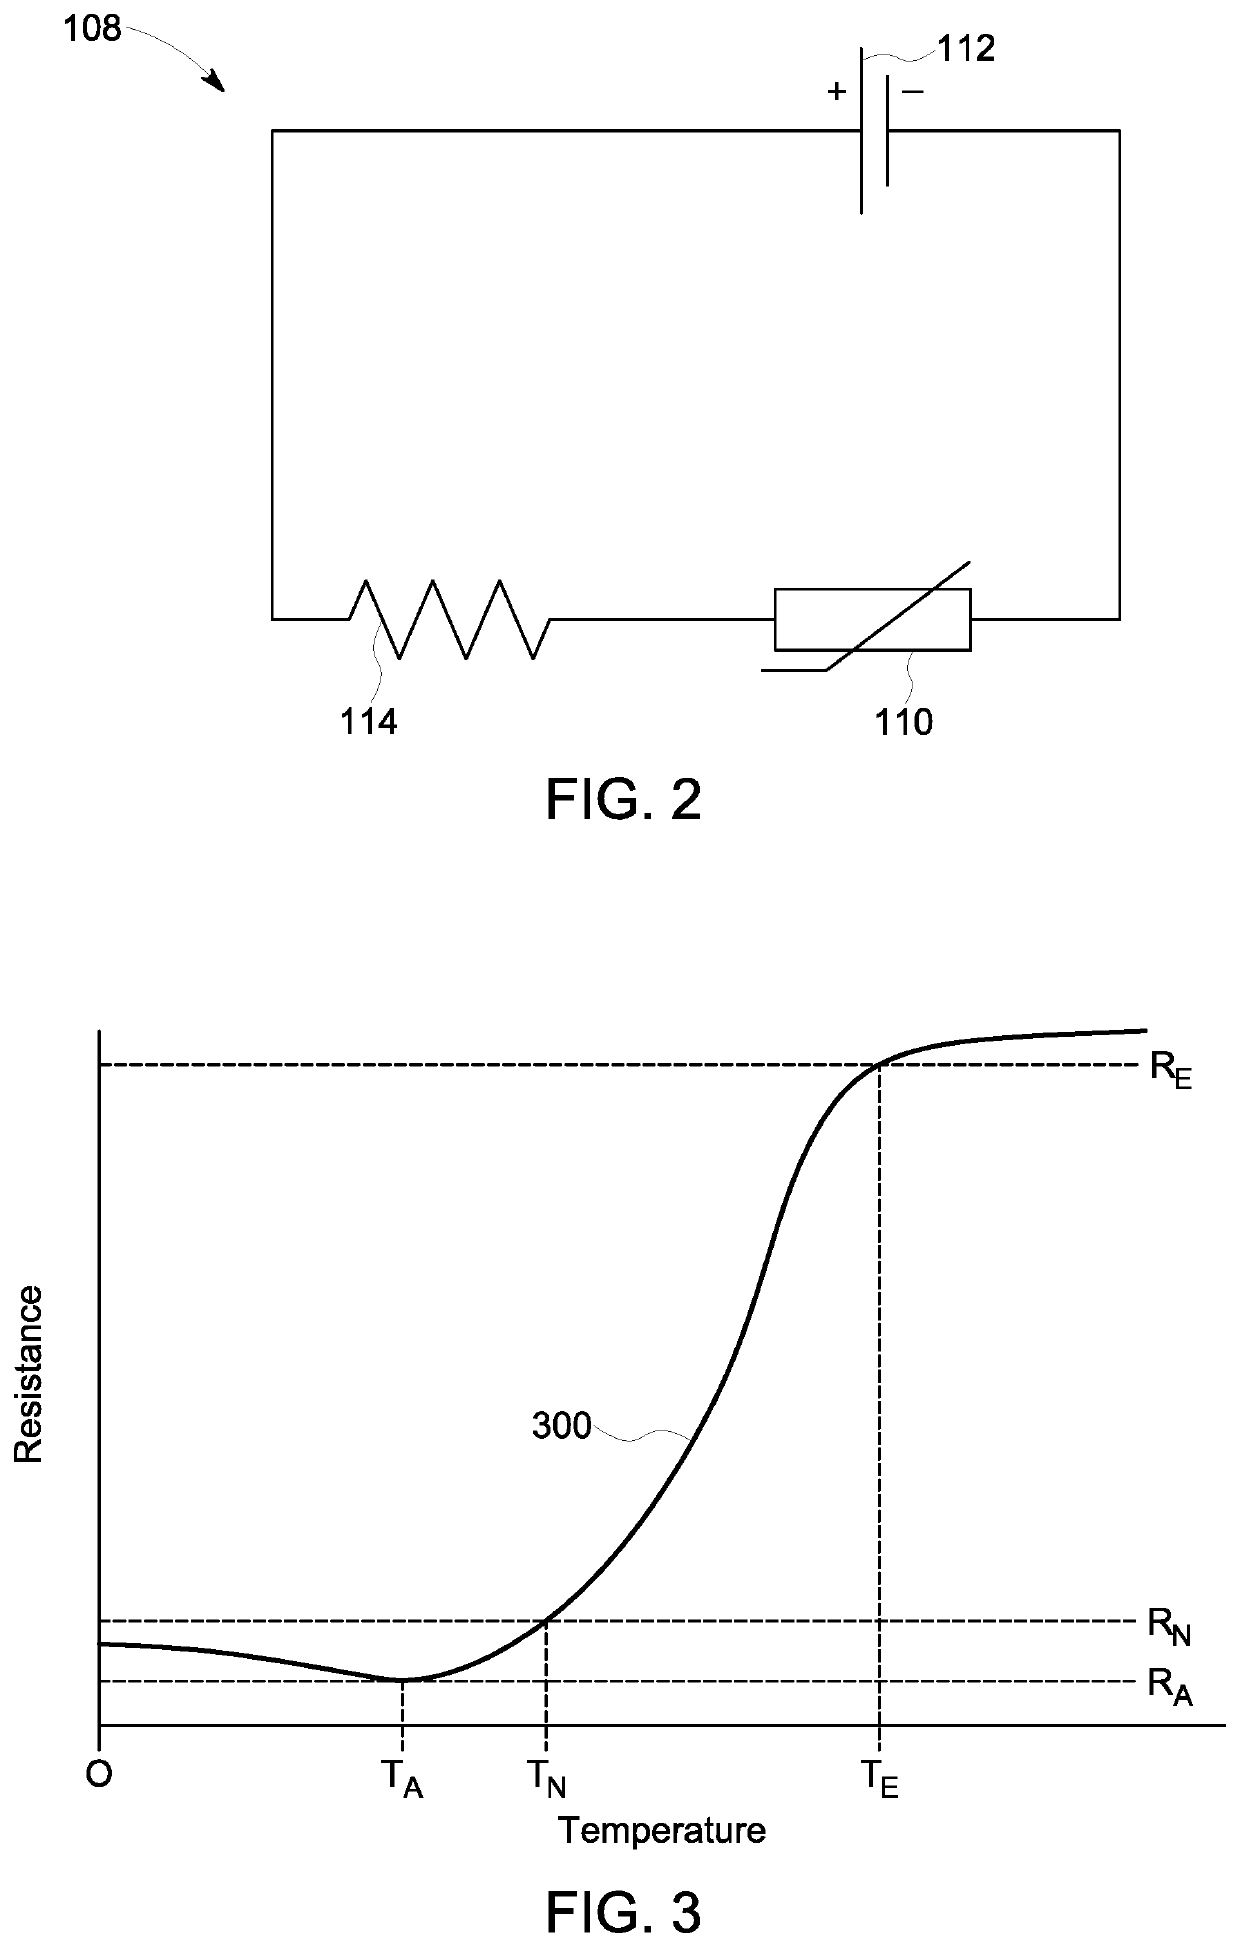 Systems and methods for passive heating of temperature-sensitive electronic components